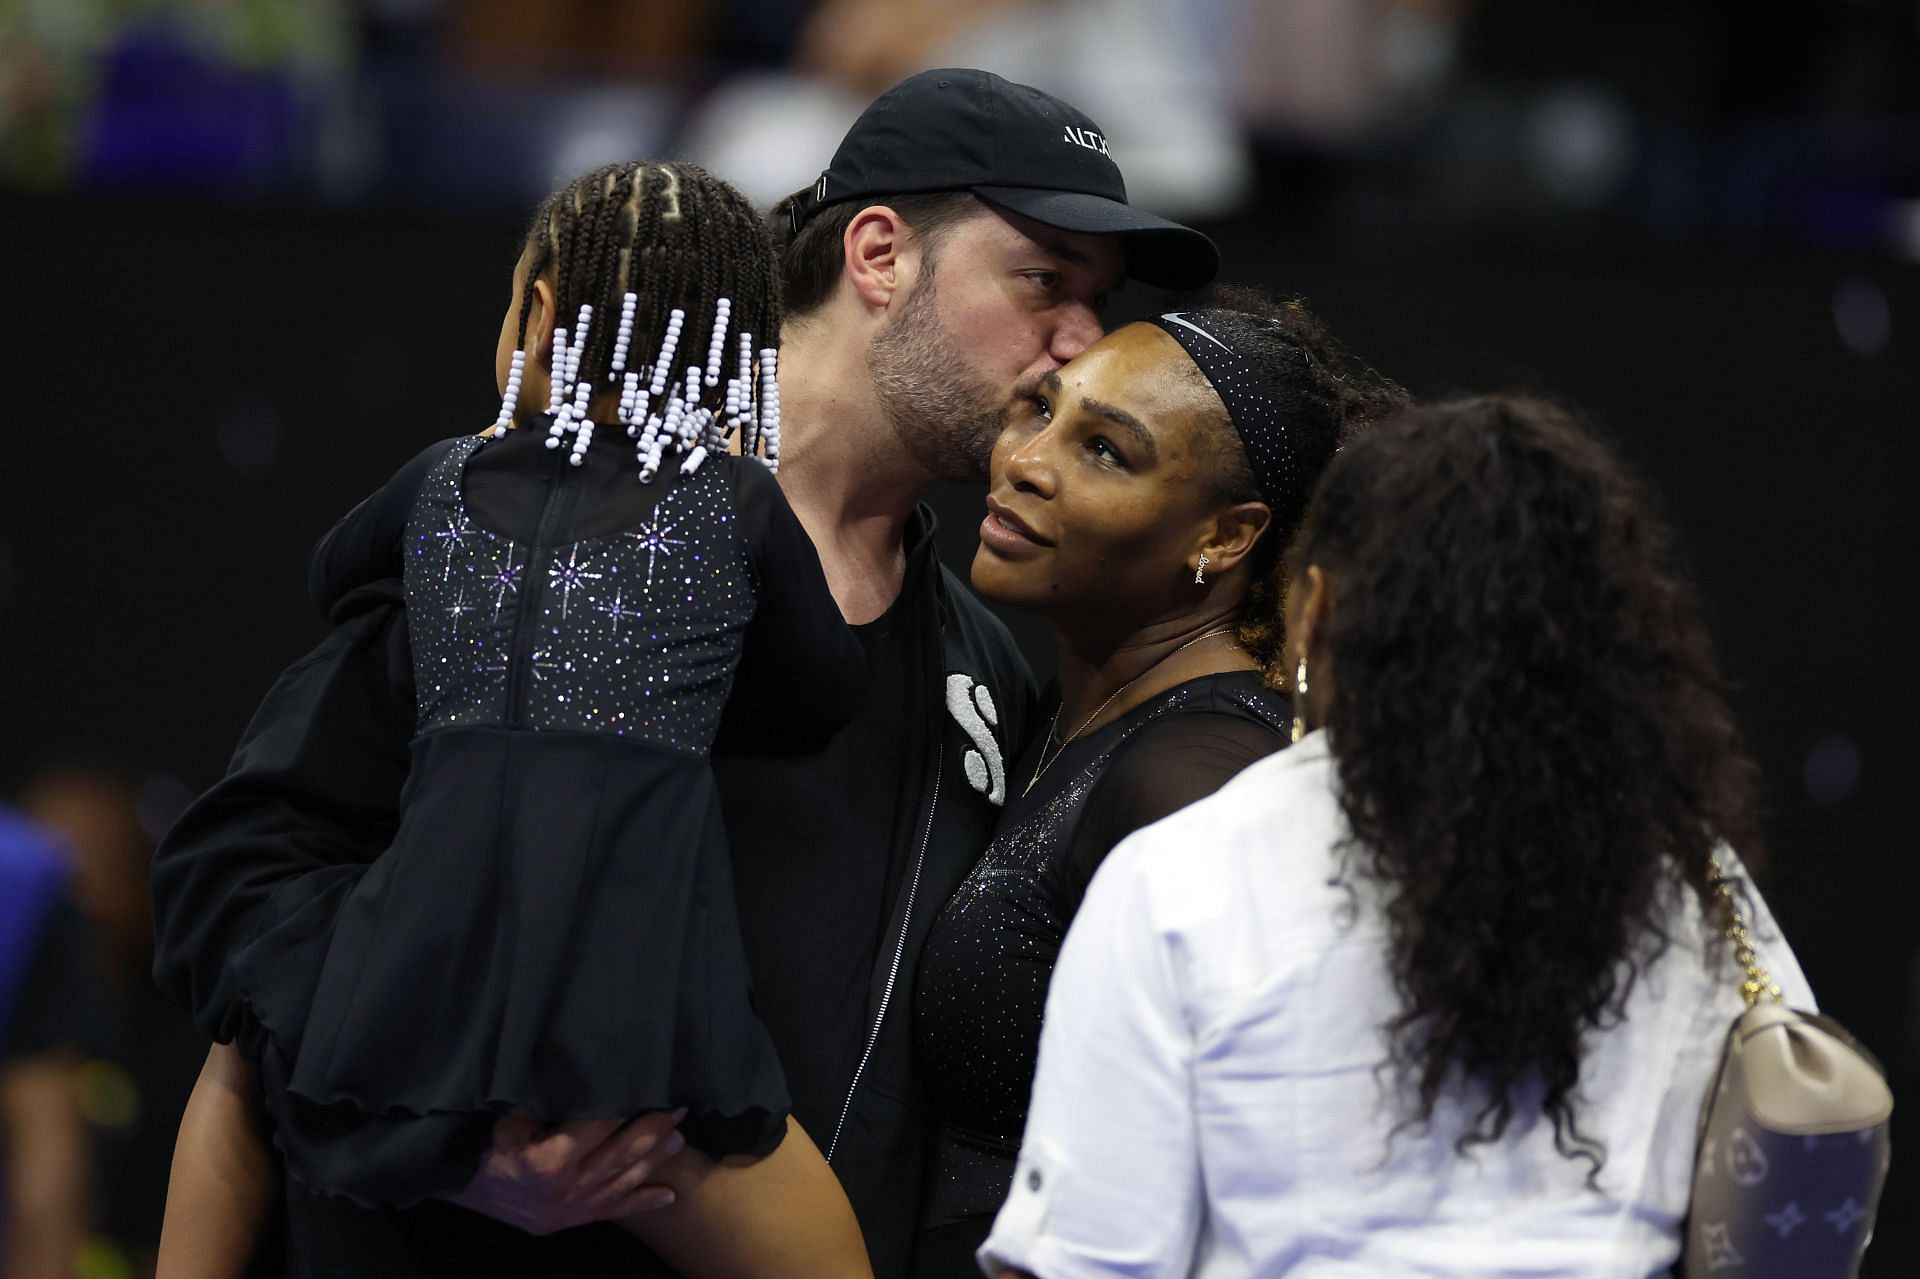 Williams greeted by her husband Alexis Ohanian at the 2022 US Open